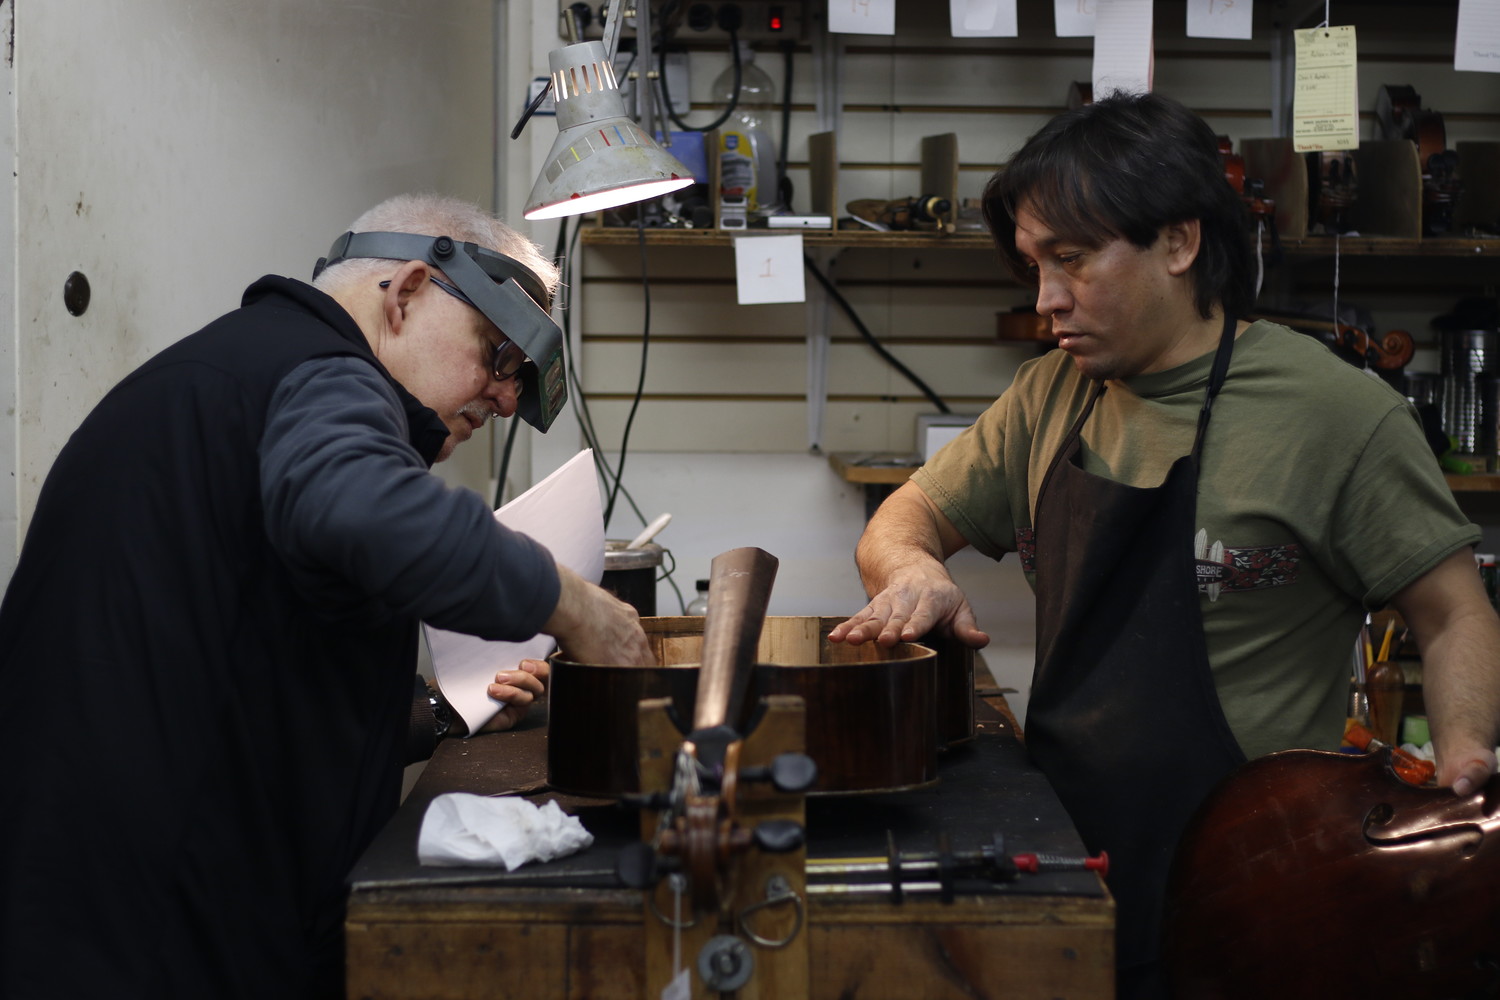 Jake Cradilas and Ricardo Hernandez make a final examination of the repairs before gluing the cello back together.